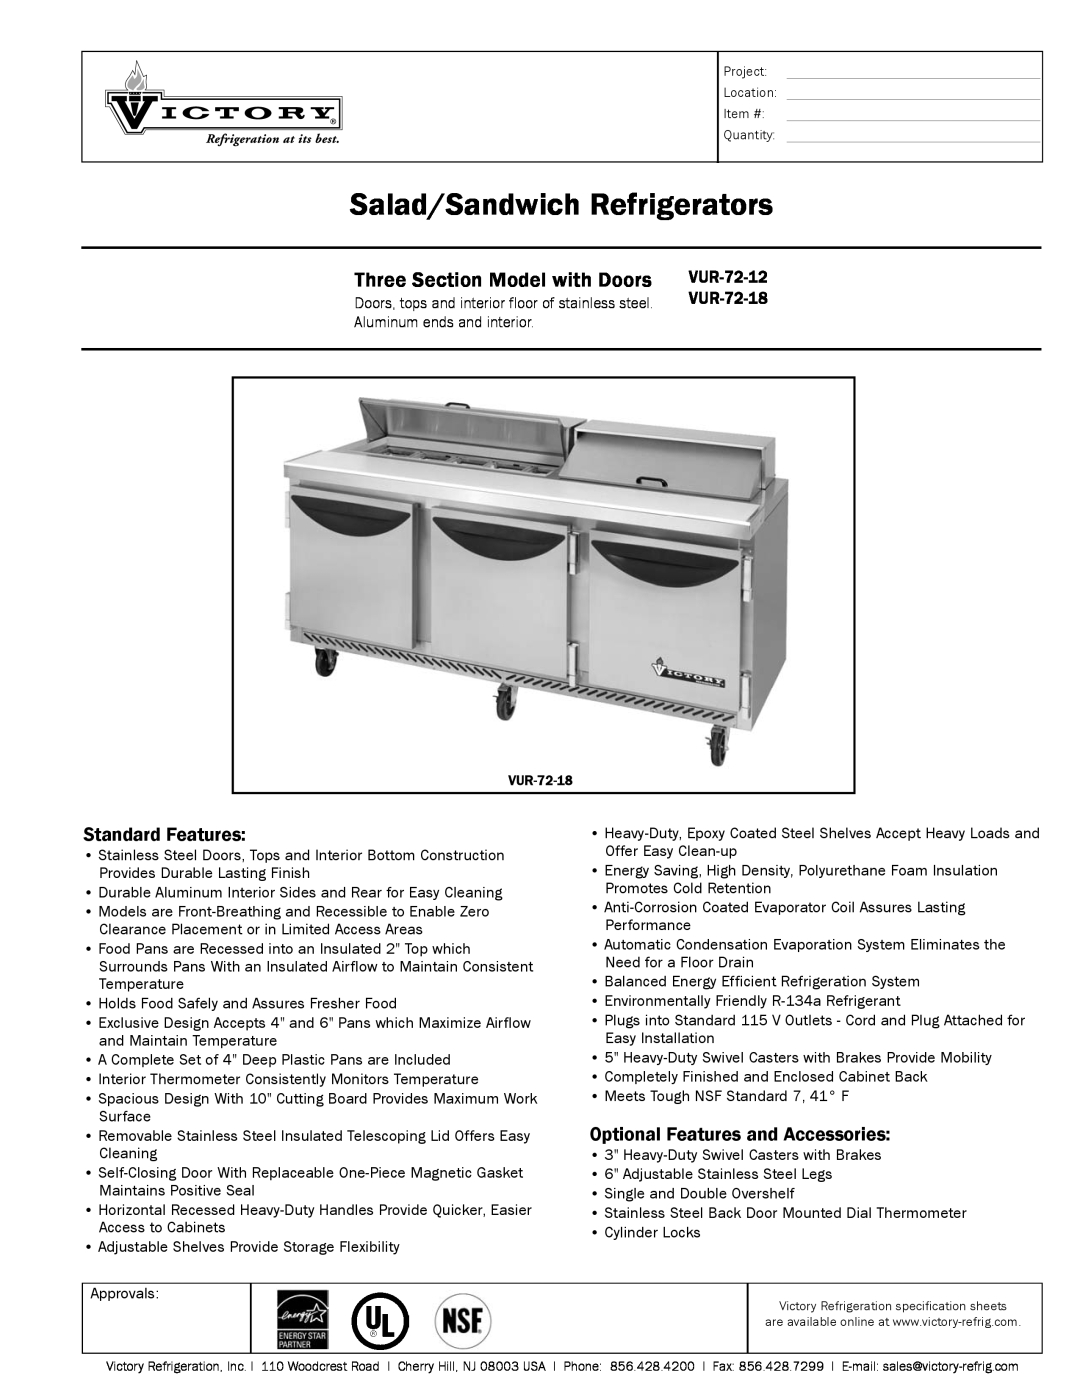 Victory Refrigeration VUR-72-12-18 specifications Salad/Sandwich Refrigerators, Three Section Model with Doors 